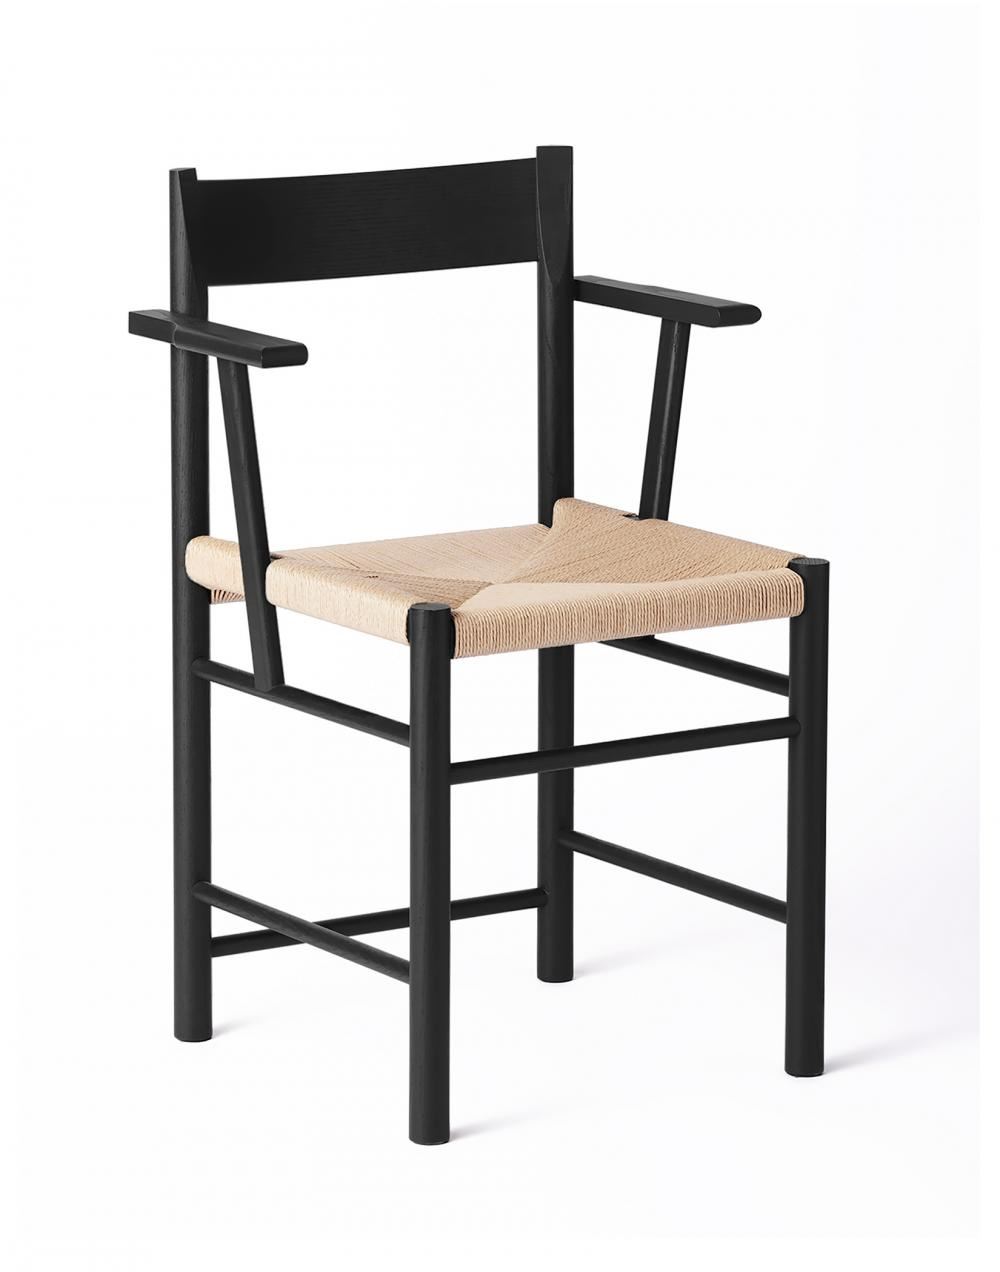 F Dining Chair Black Painted Ash Natural Paper Cord Weaved Seat With Armrest